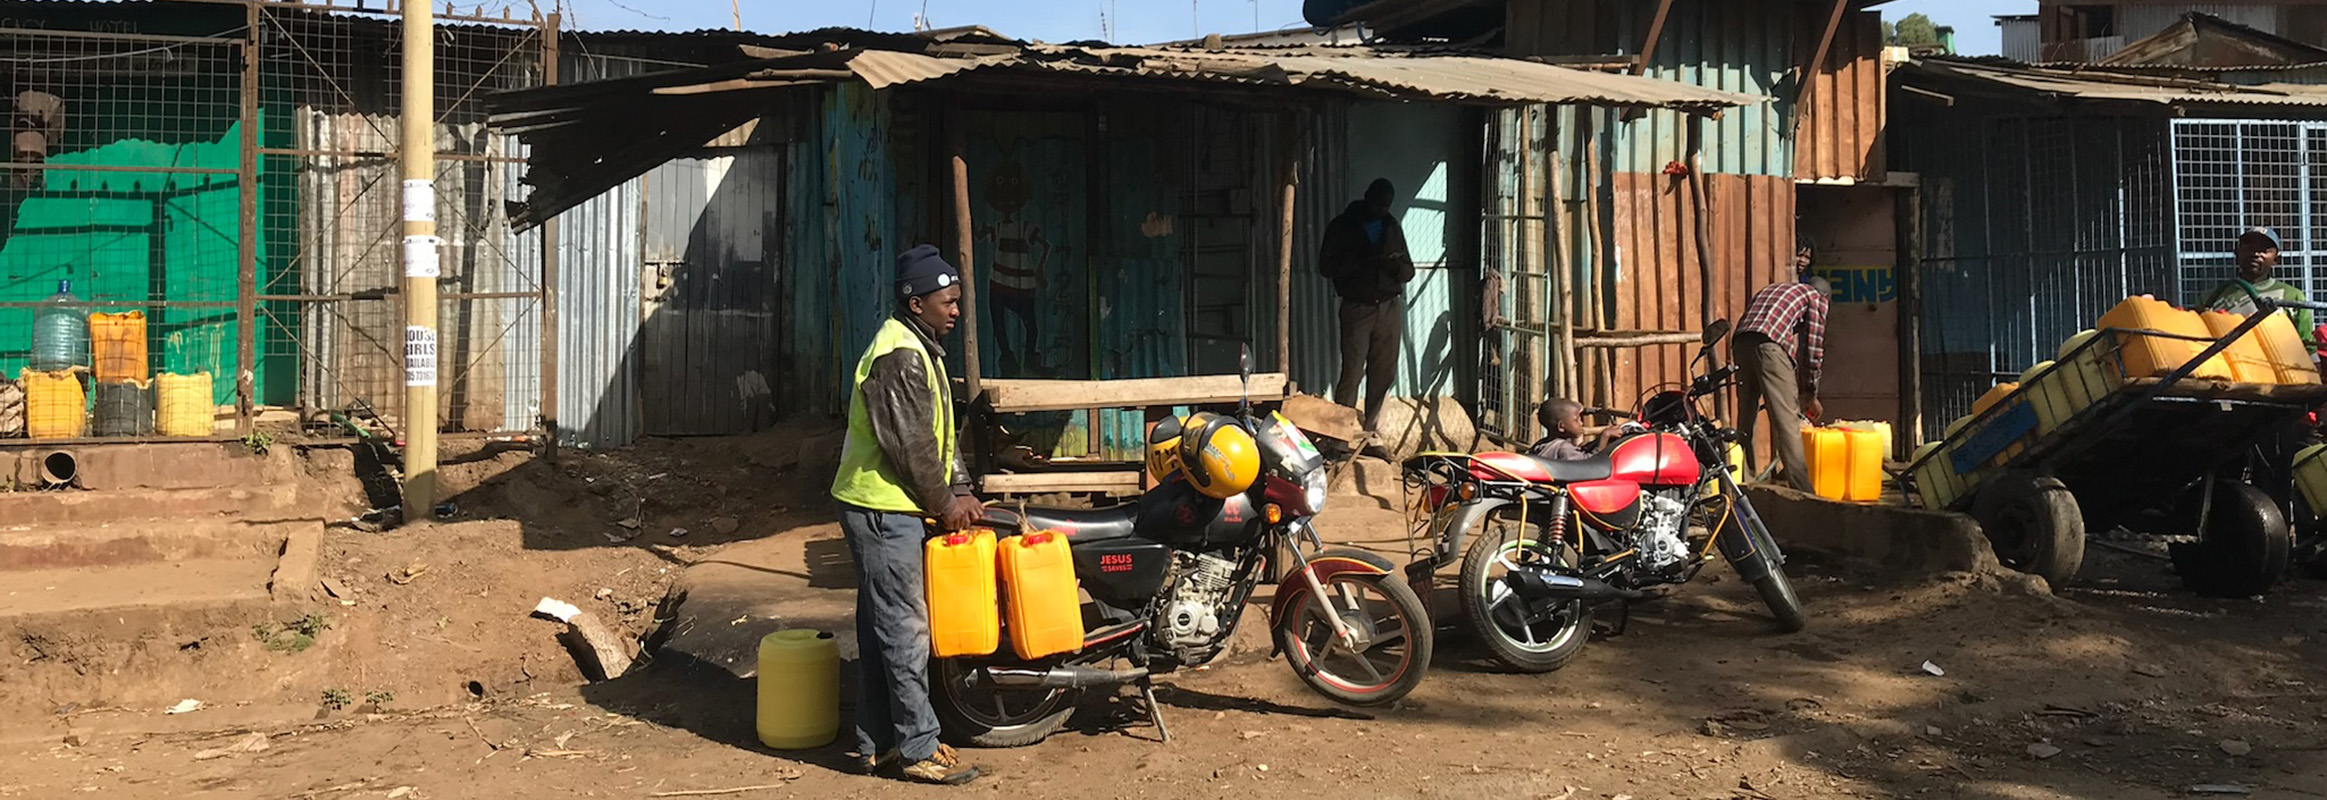 A man in a high visibility jacket carefully balances yellow jerry cans filled with water on his motorcycle in a bustling community setting, showcasing daily water collection routines.